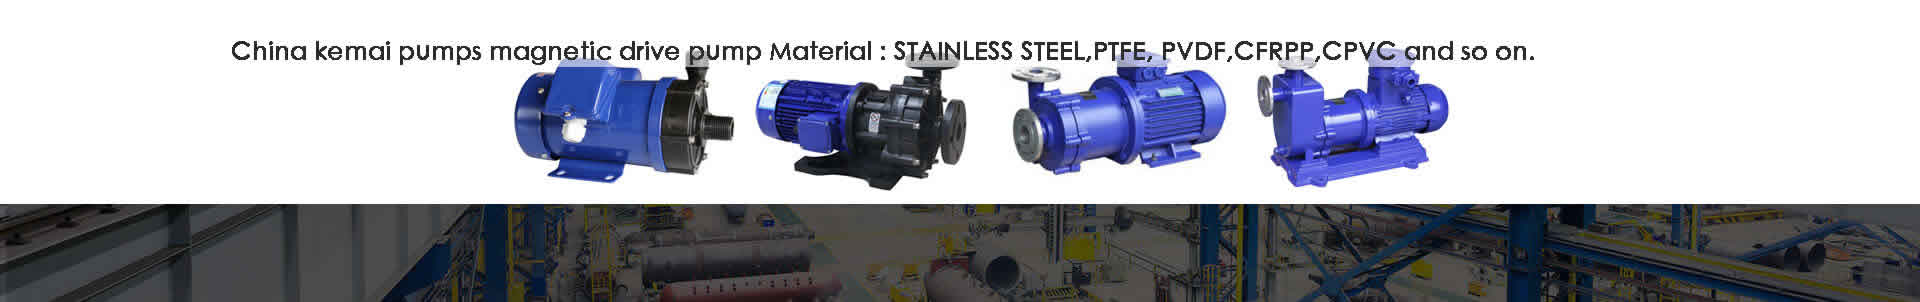 Magnetic Pump Manufacturer In China